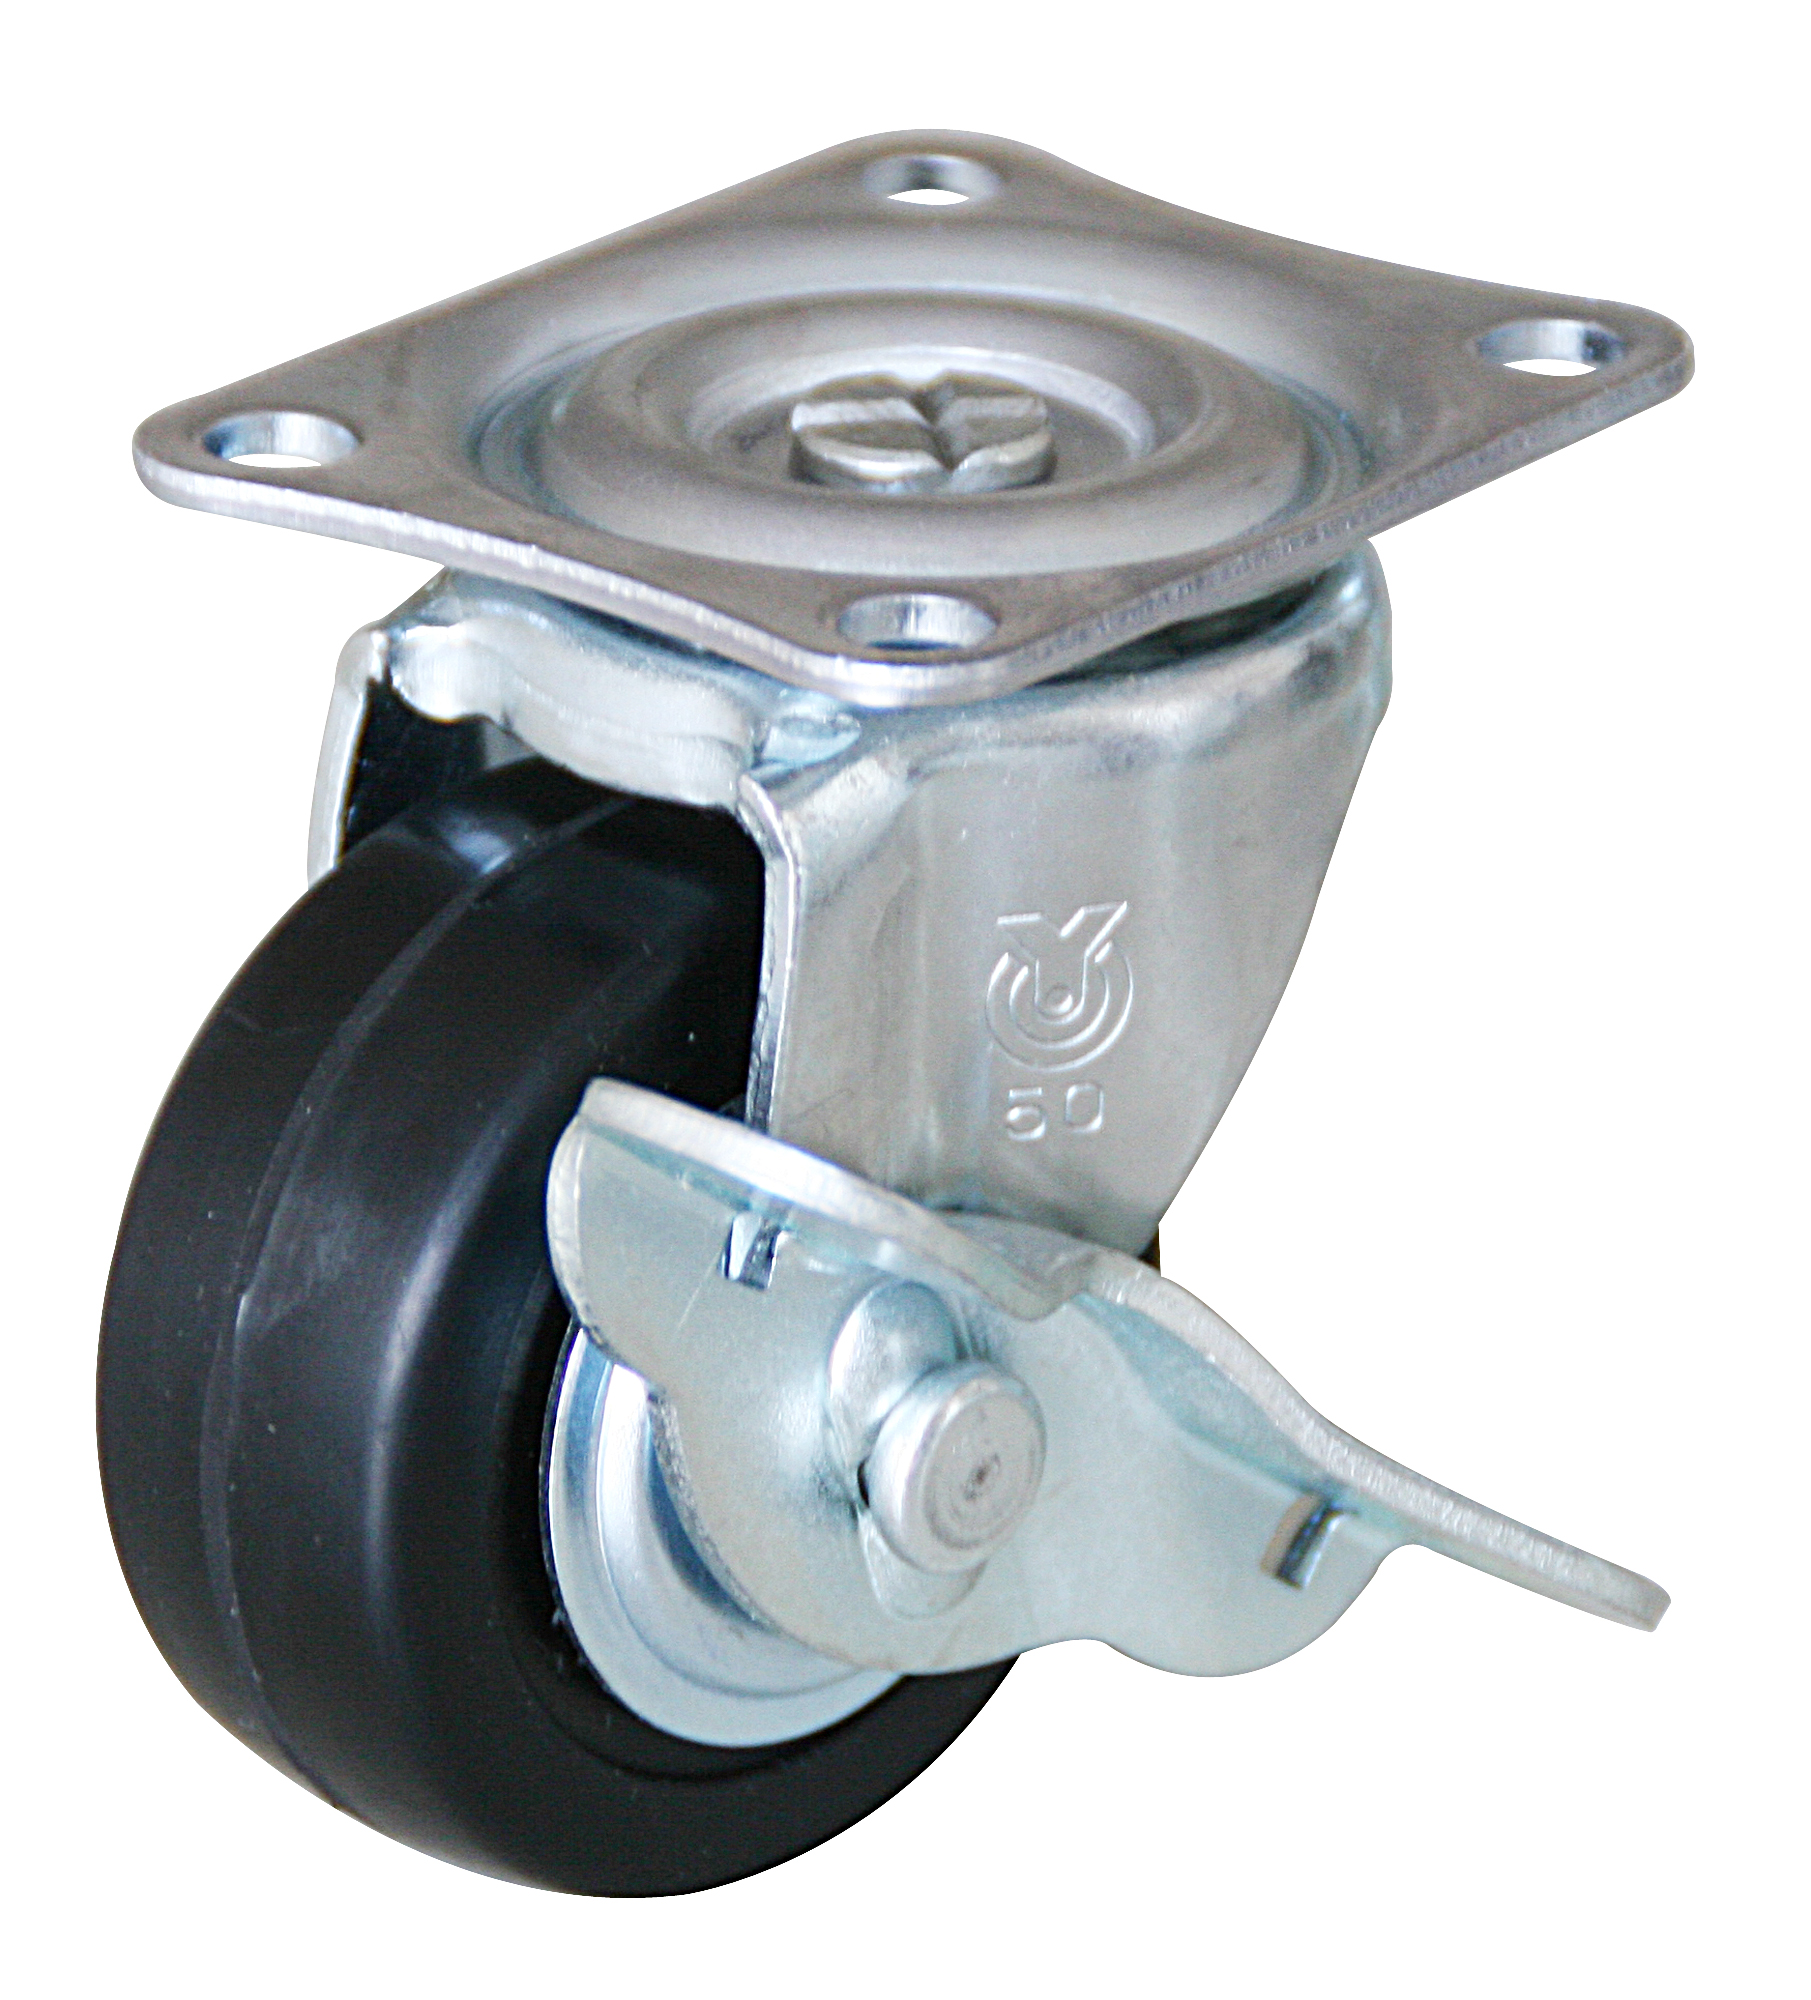 Casters - With swivel plate, G-S series. G-65NS